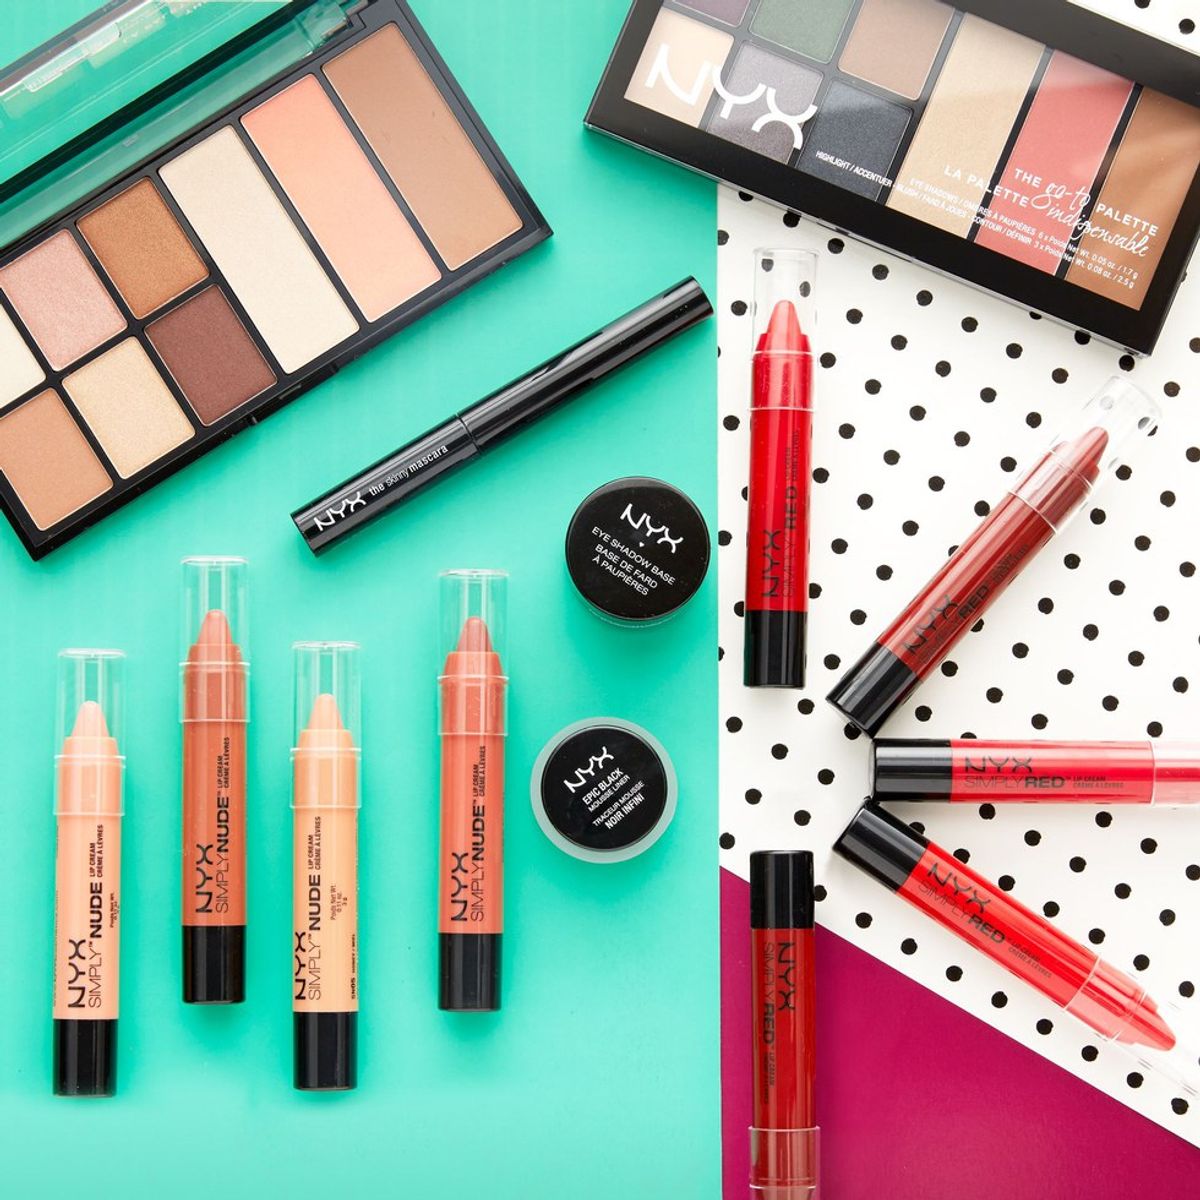 10 Cruelty-Free Beauty Brands To Spend Your Money On